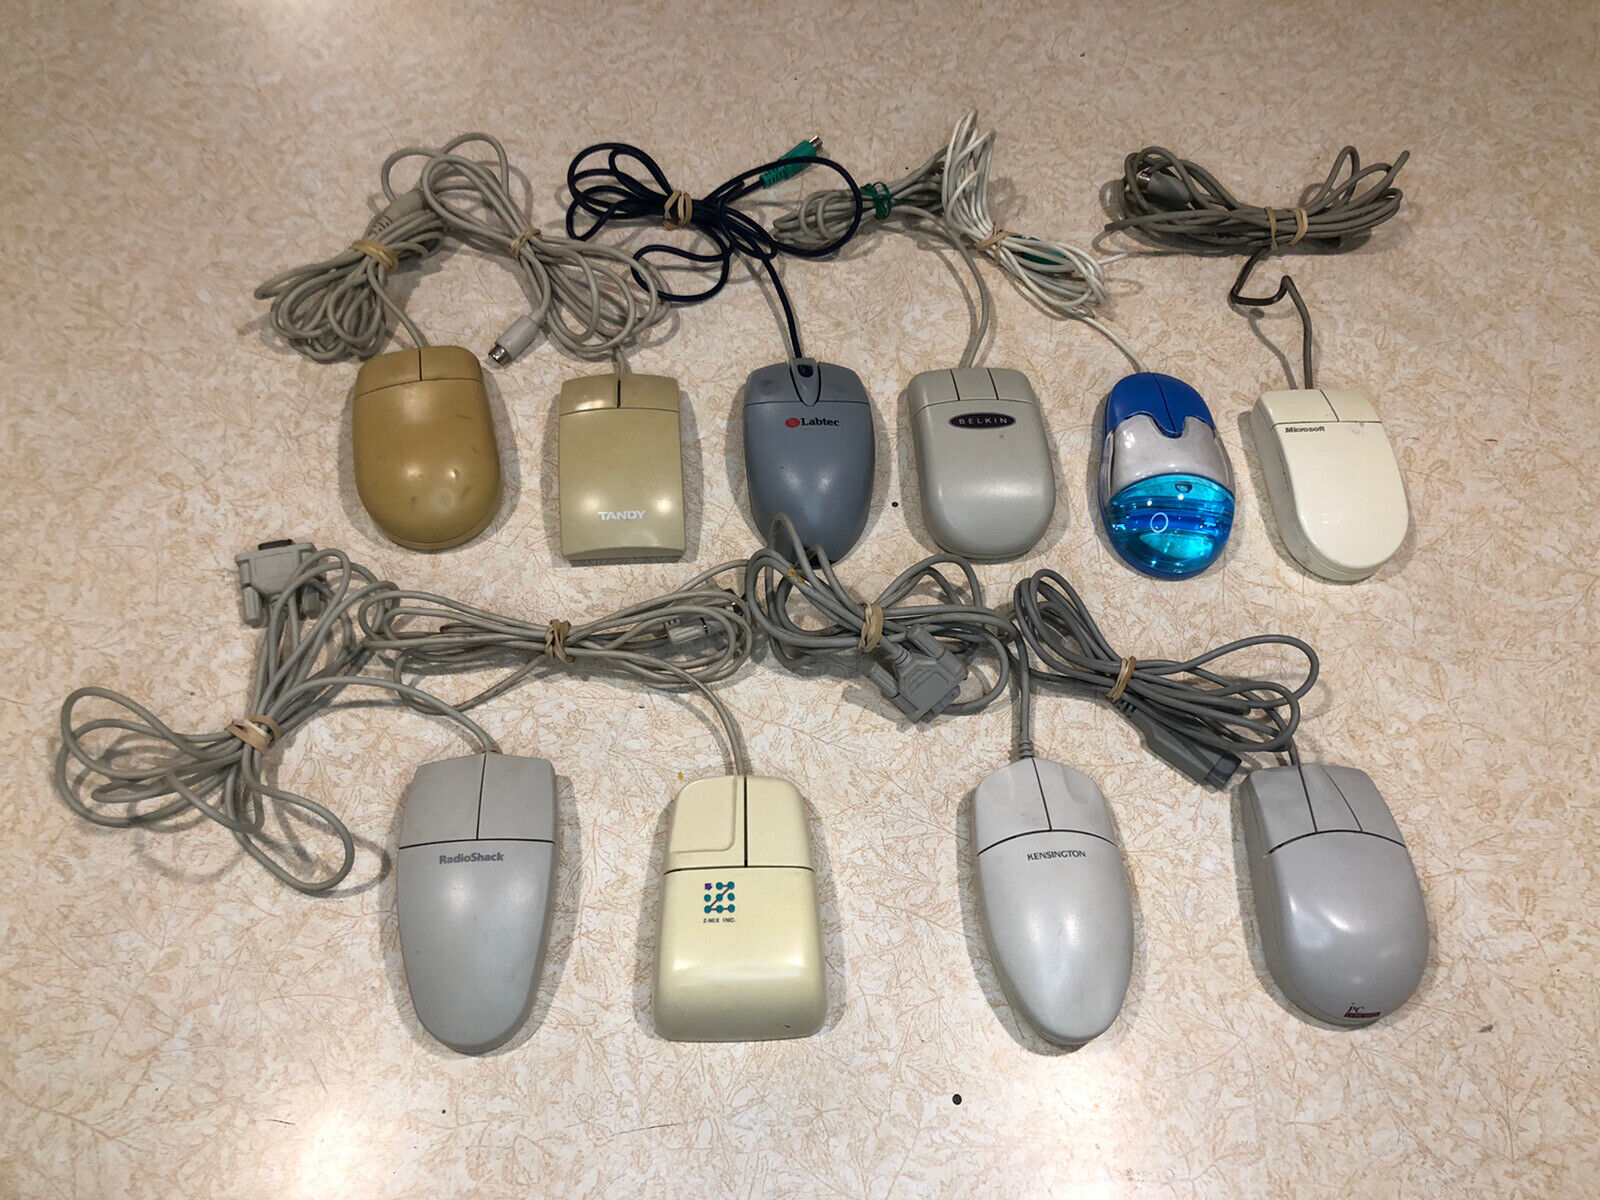 Lot 10 VINTAGE COMPUTER WIRED MOUSE TRACKBALL PS/2 SERIAL OPTICAL MICE